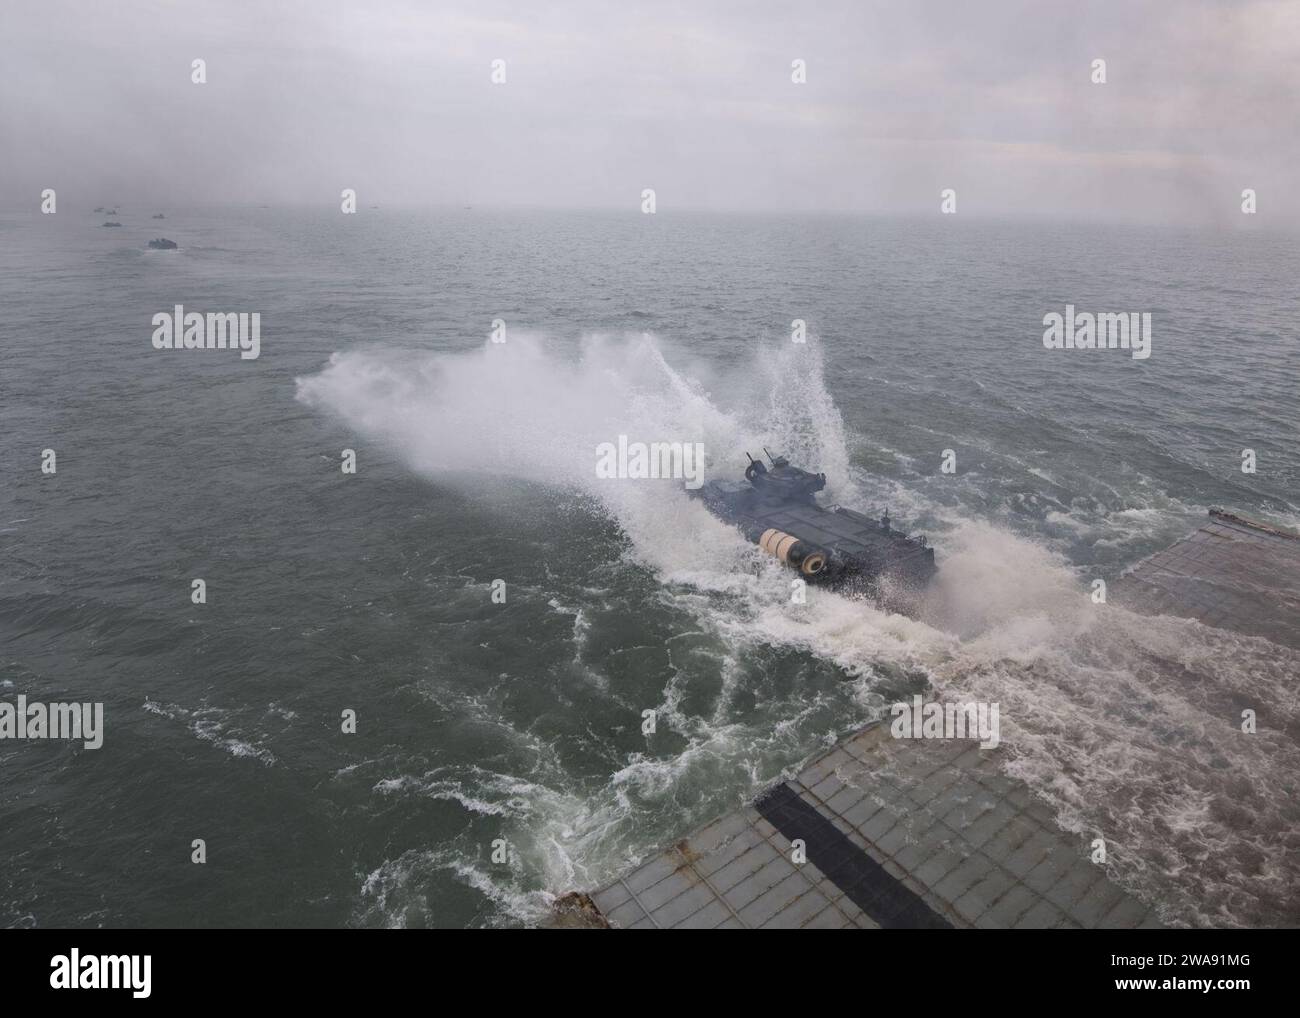 US military forces. 180309TJ319-0121 BLACK SEA (March 9, 2018) An AAV-P7/A1 assault amphibious vehicle, attached to the 26th Marine Expeditionary Unit, exits the well deck of the Harpers Ferry-class dock landing ship USS Oak Hill (LSD 51) March 9, 2018 during exercise Spring Storm 2018. Spring Storm is a Romanian-led exercise in the Black Sea to enhance amphibious operations and staff interoperability between Romanian and U.S. naval forces. Oak Hill, home-ported in Virginia Beach, Virginia, is conducting naval operations in the U.S. 6th Fleet area of operations. (U.S. Navy photo by Mass Commun Stock Photo